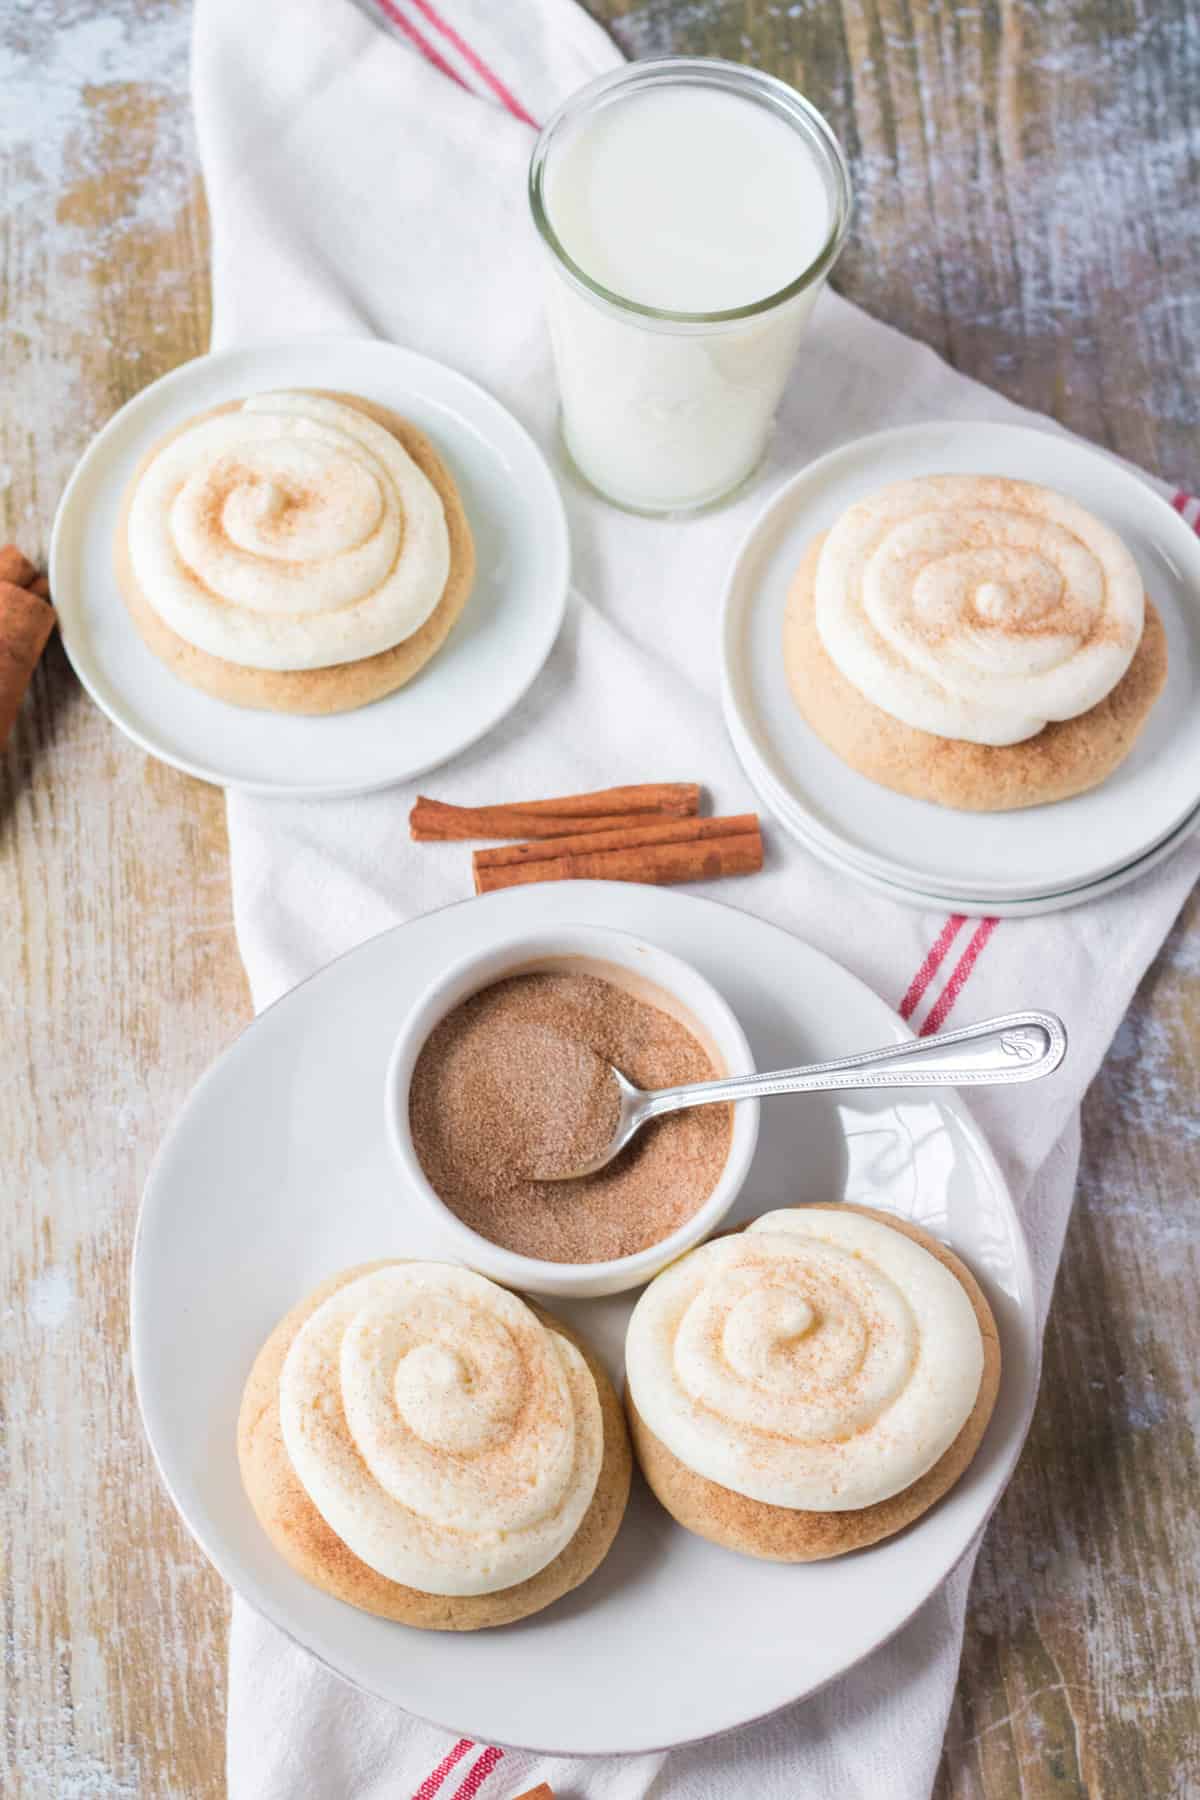 Frosted snickerdoodle cookies are placed next to an extra bowl of cinnamon sugar with a glass of milk.